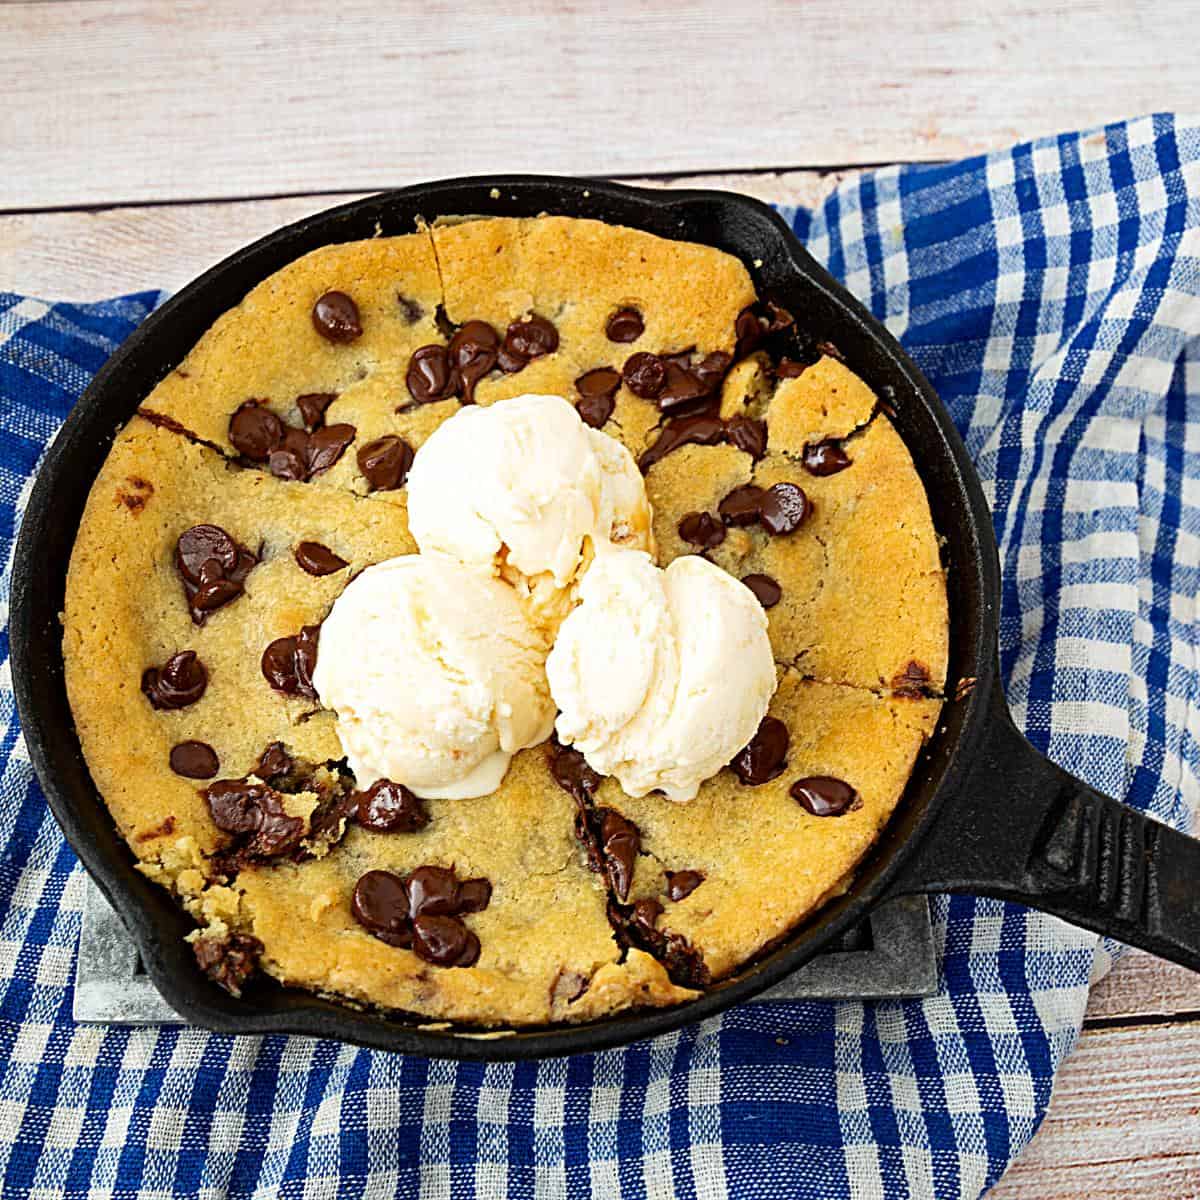 Skillet with cookie and ice cream.